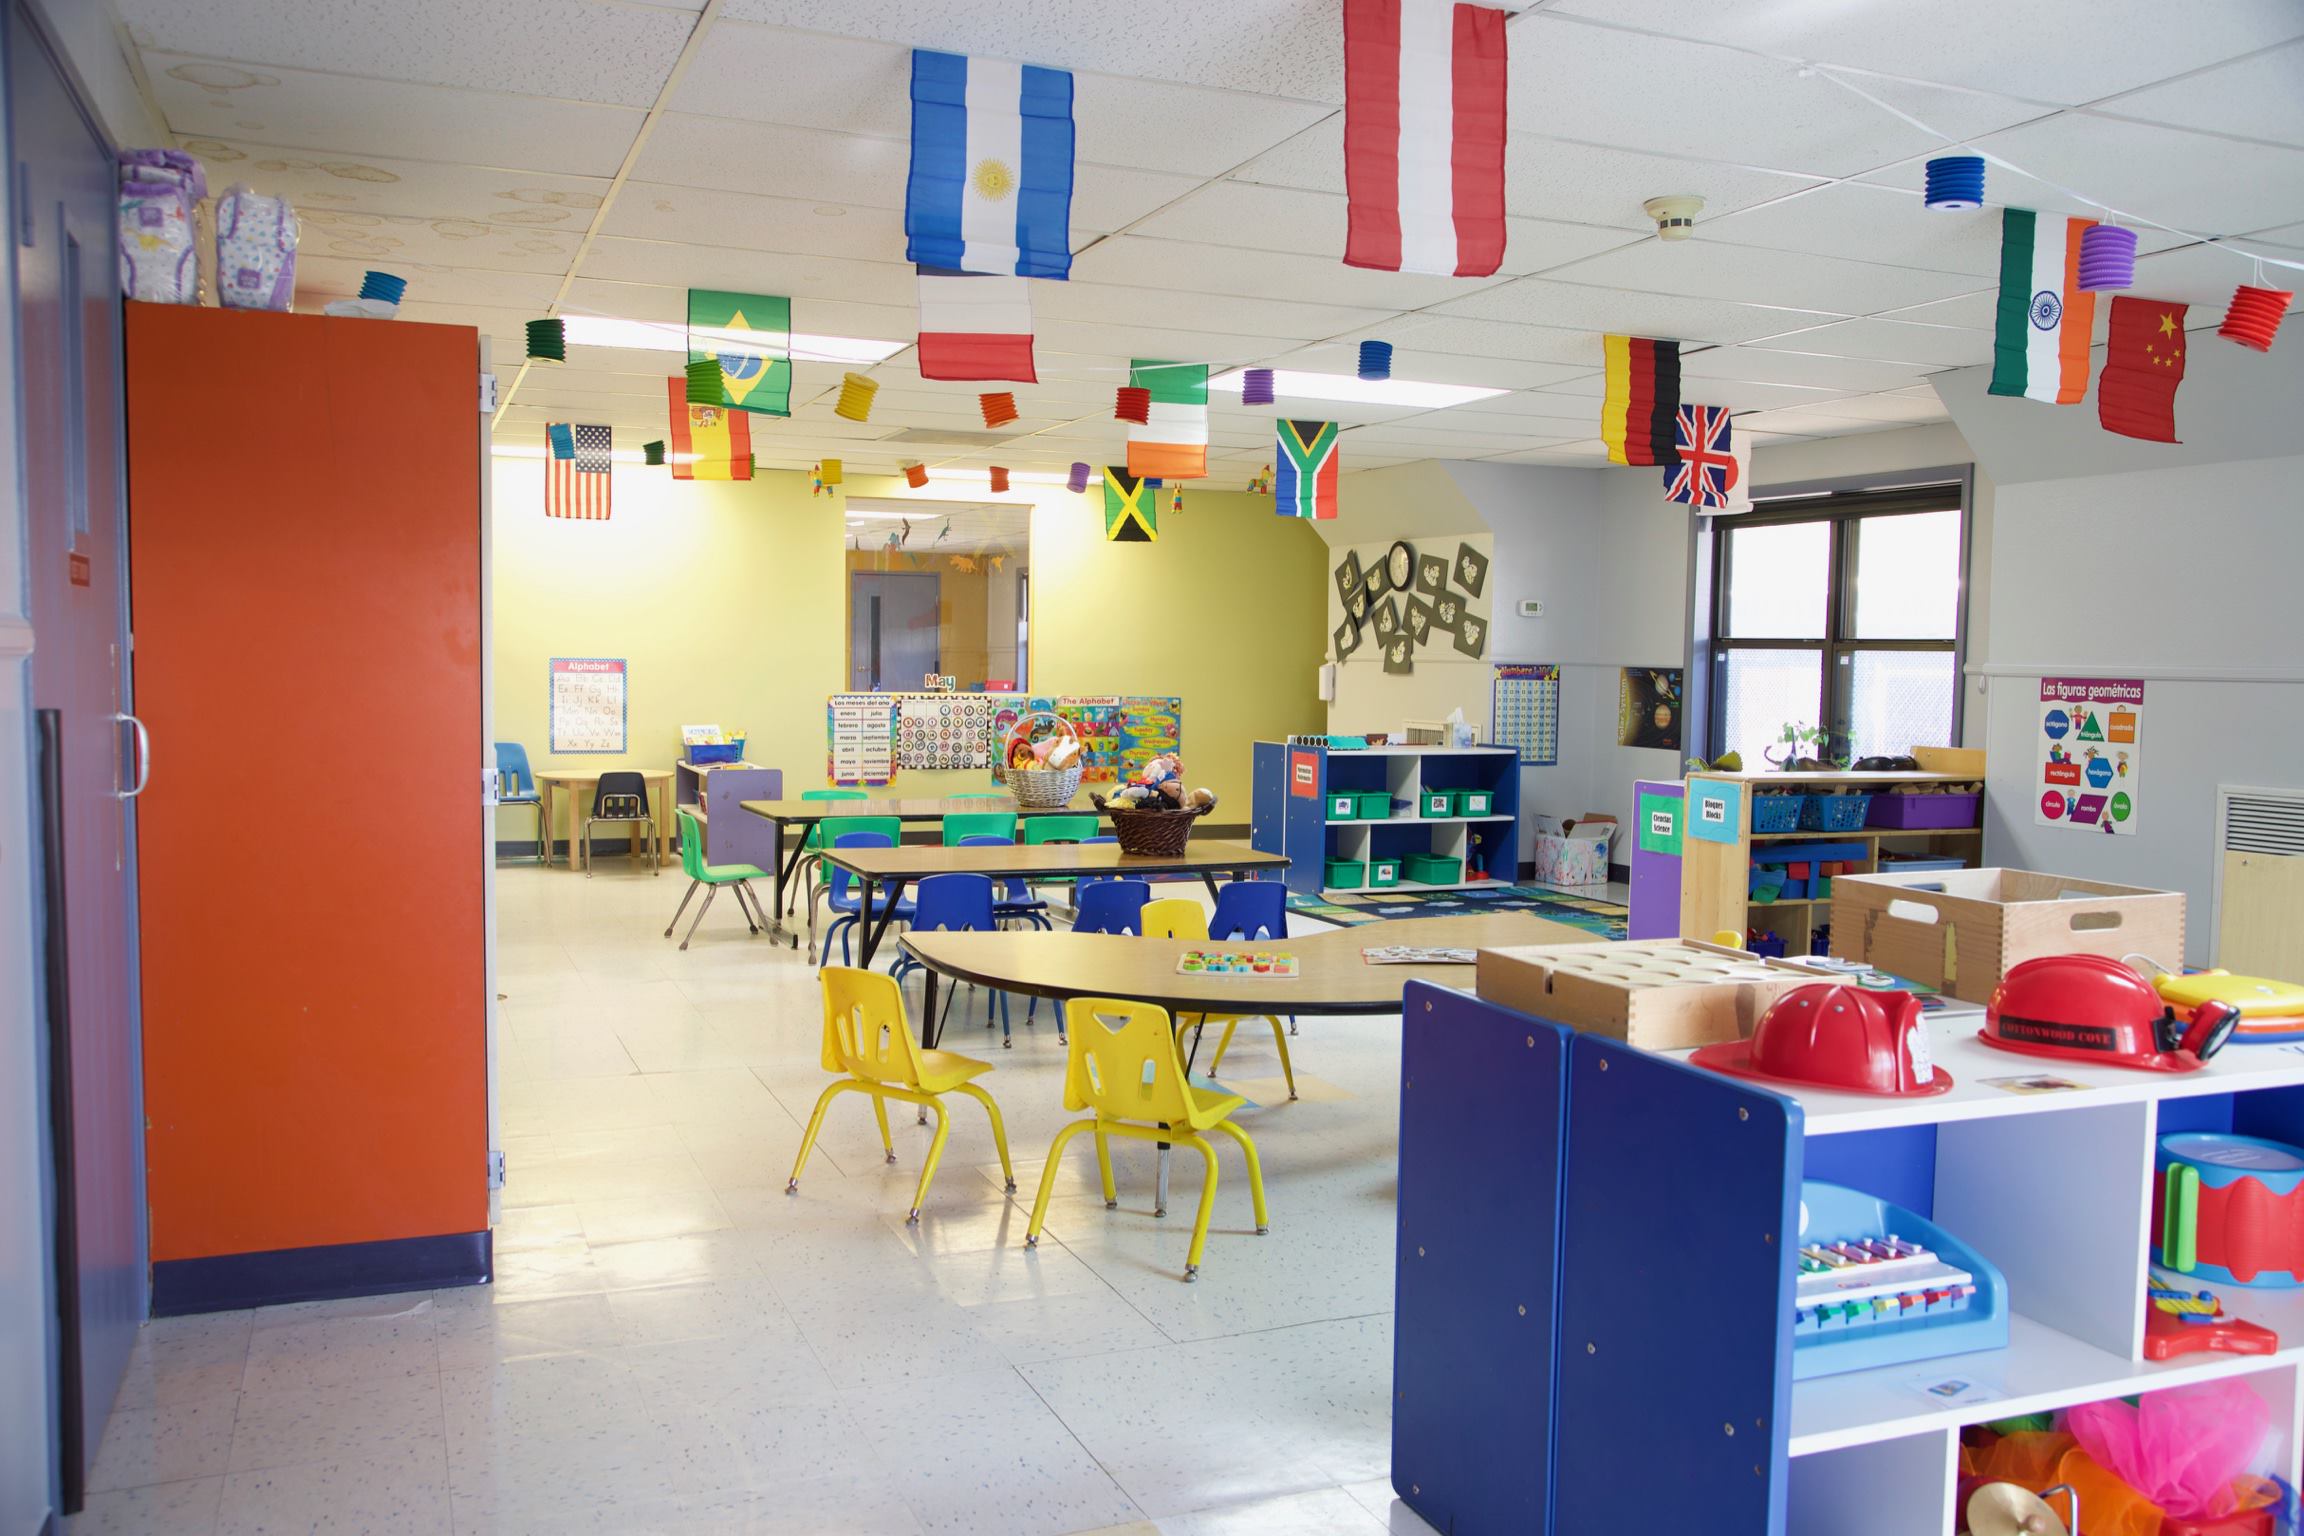 Parker Early Learning Spanish Room